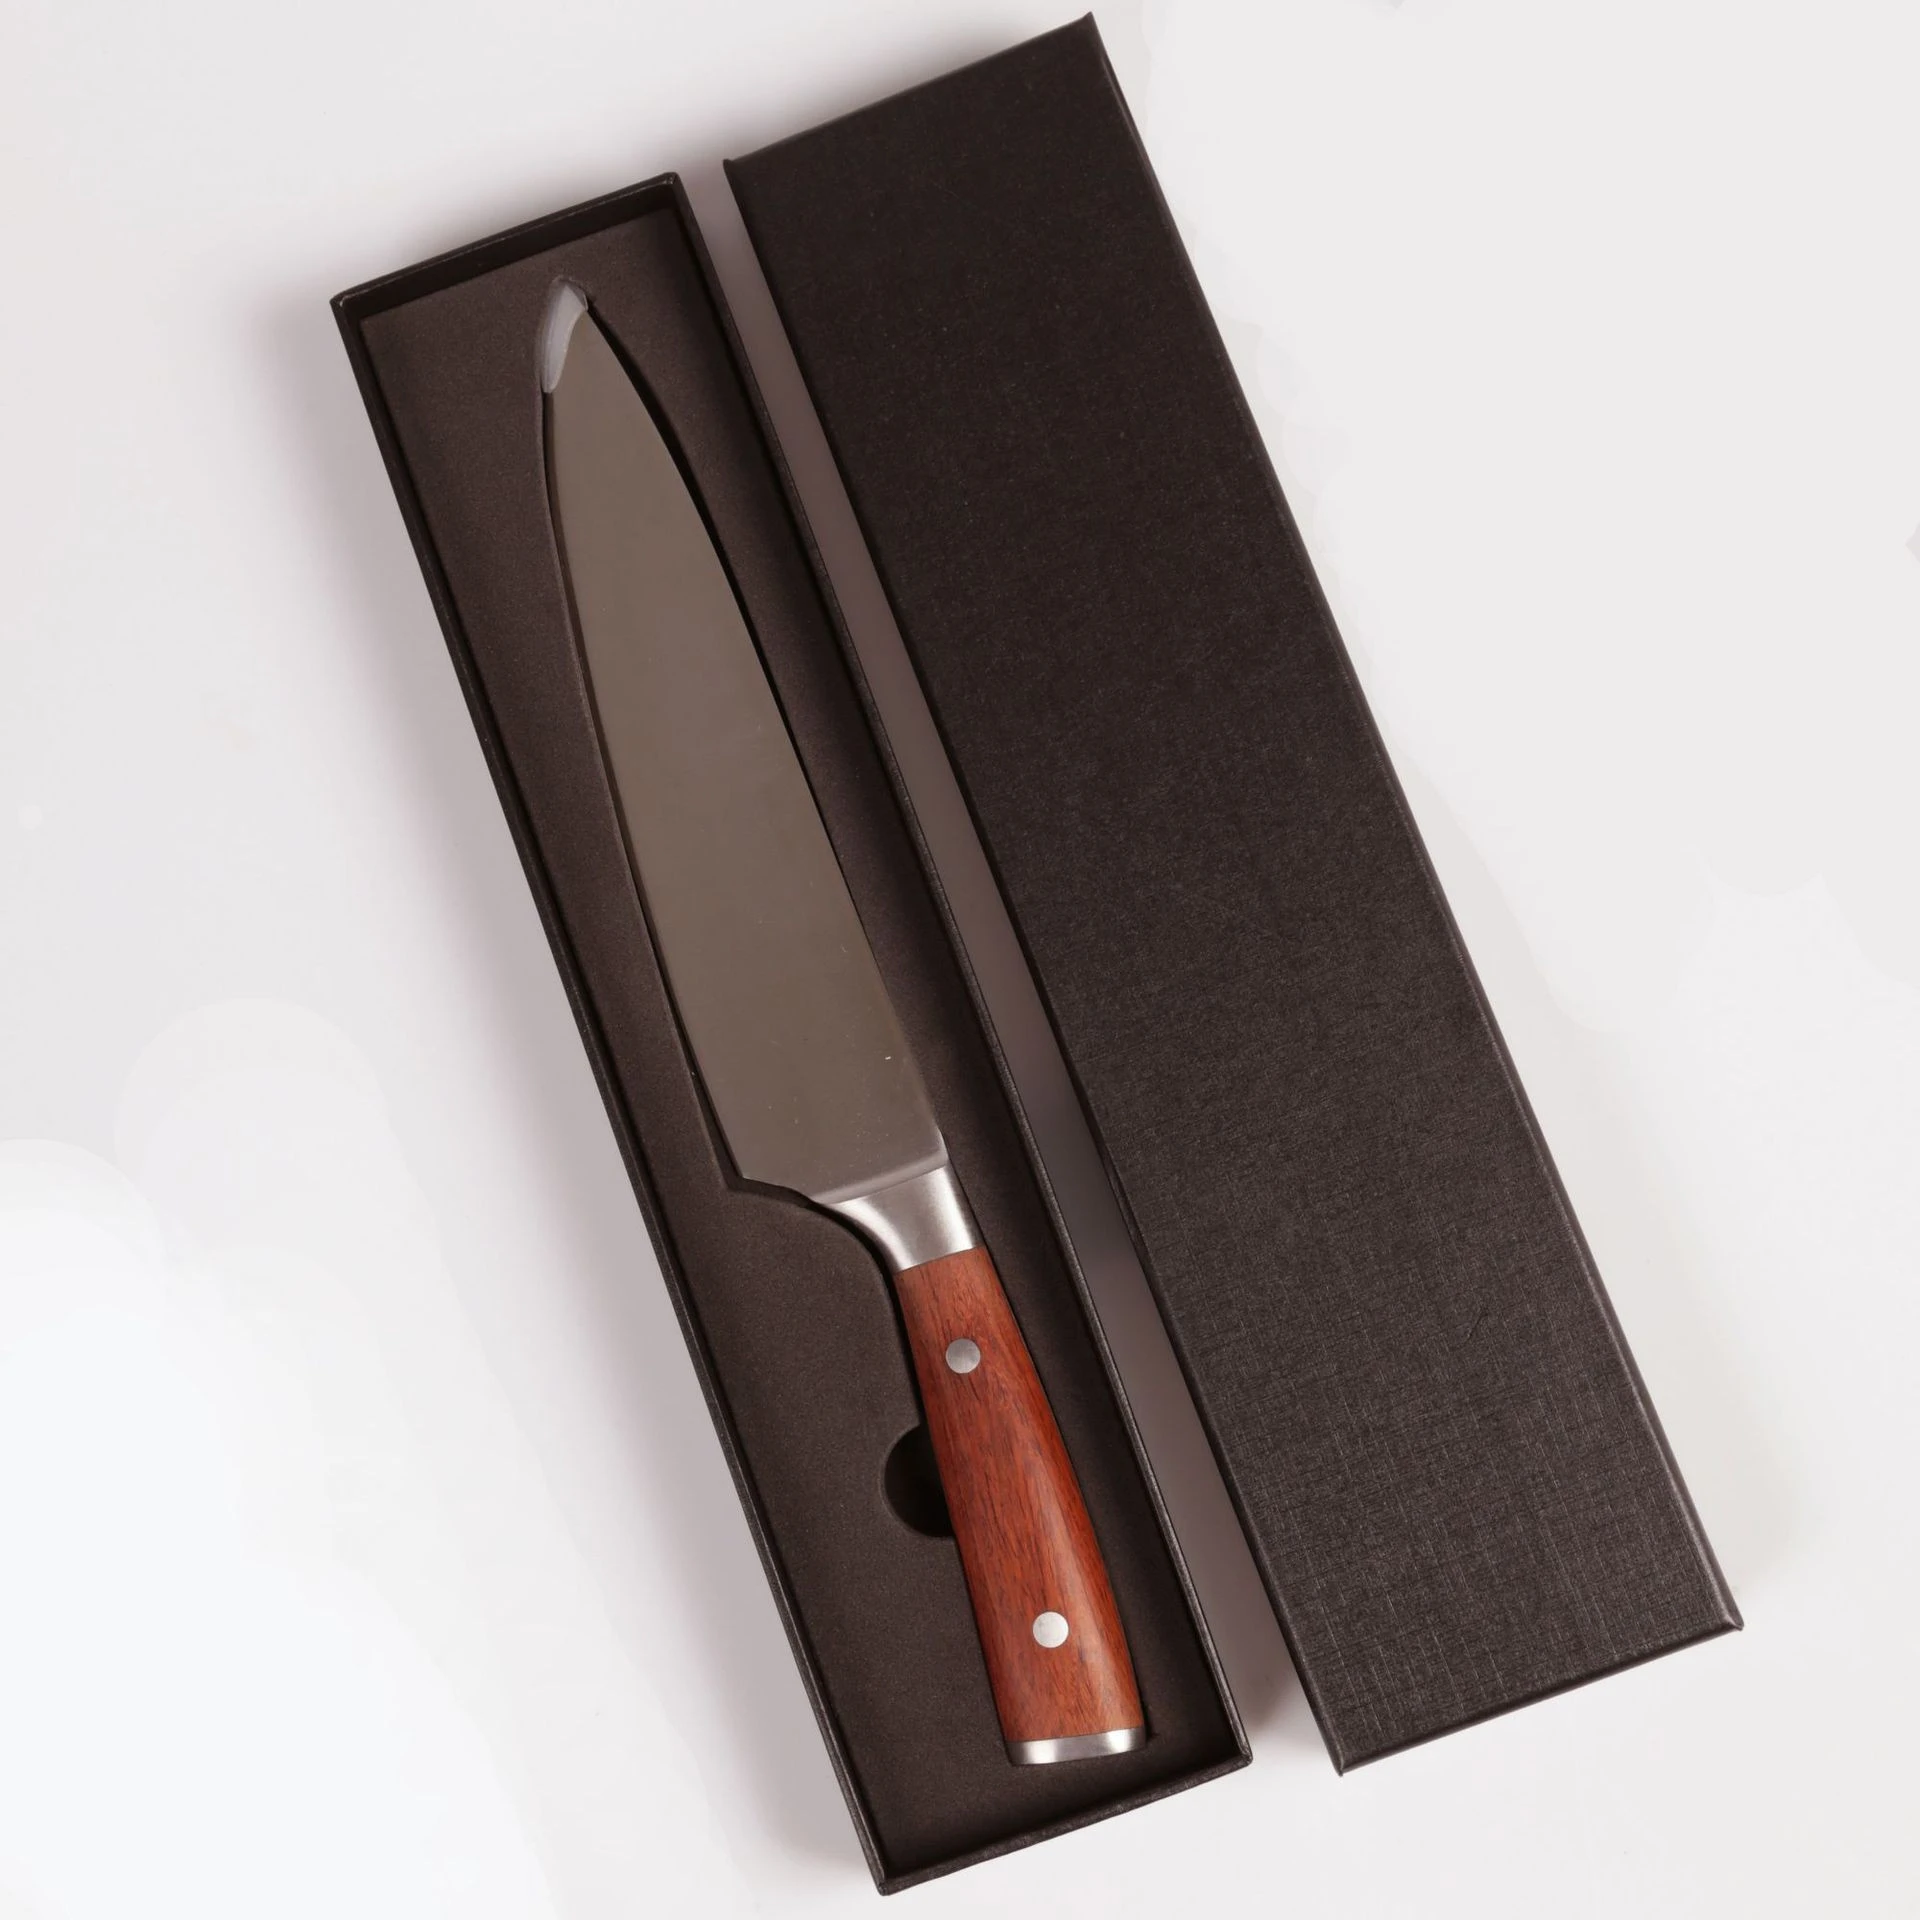 Japanese style 8inch 7Cr17Mov chef knife stainless steel kitchen knife